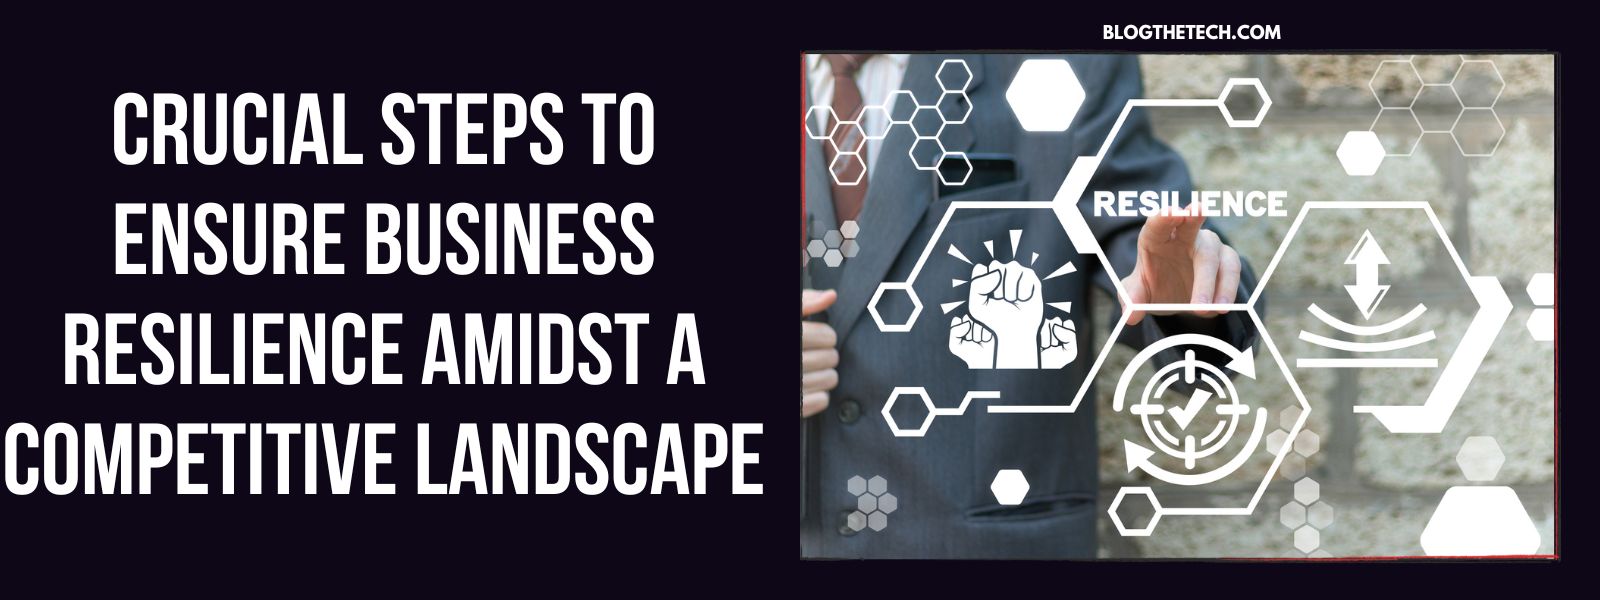 Crucial Steps To Ensure Business Resilience Amidst A Competitive Landscape